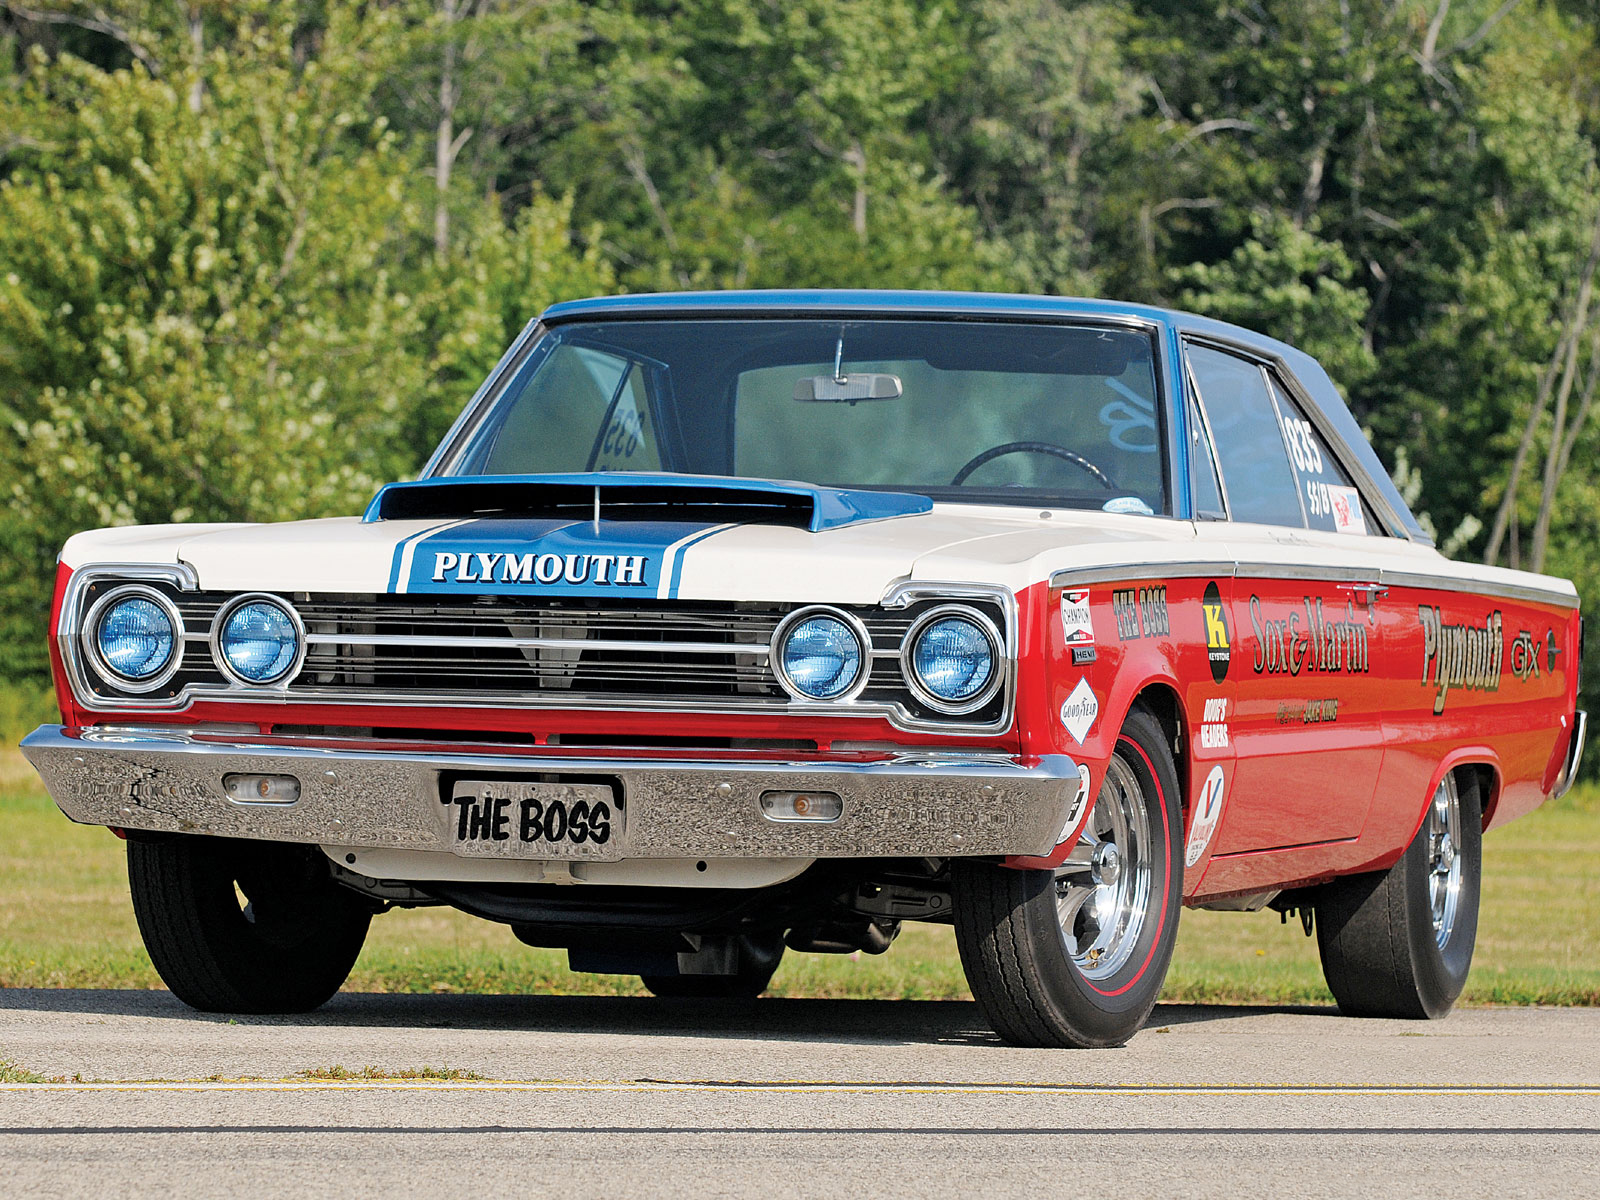 1967, Plymouth, Belvedere, Hemi, Ro23, Hardtop, Coupe, Race, Car, Drag, Racing, Hot, Rod, Rods, Muscle, Classic Wallpaper